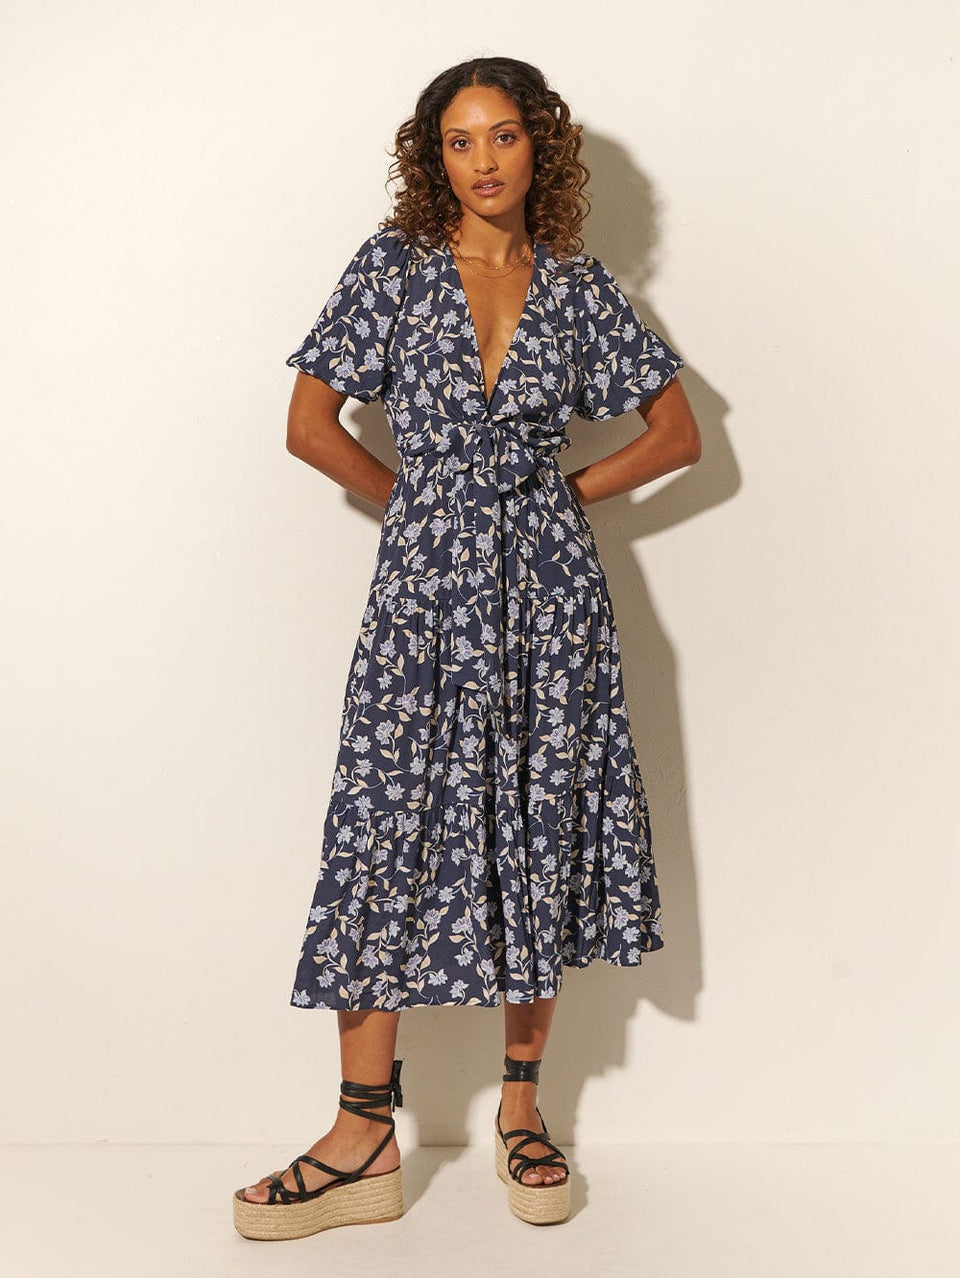 Studio model wears KIVARI Jeanne Tie Front Midi Dress: A navy and sky blue floral dress made from sustainable LENZING Viscose Crepe and featuring a tie front, elasticated waist, short puff sleeves and tiered skirt.